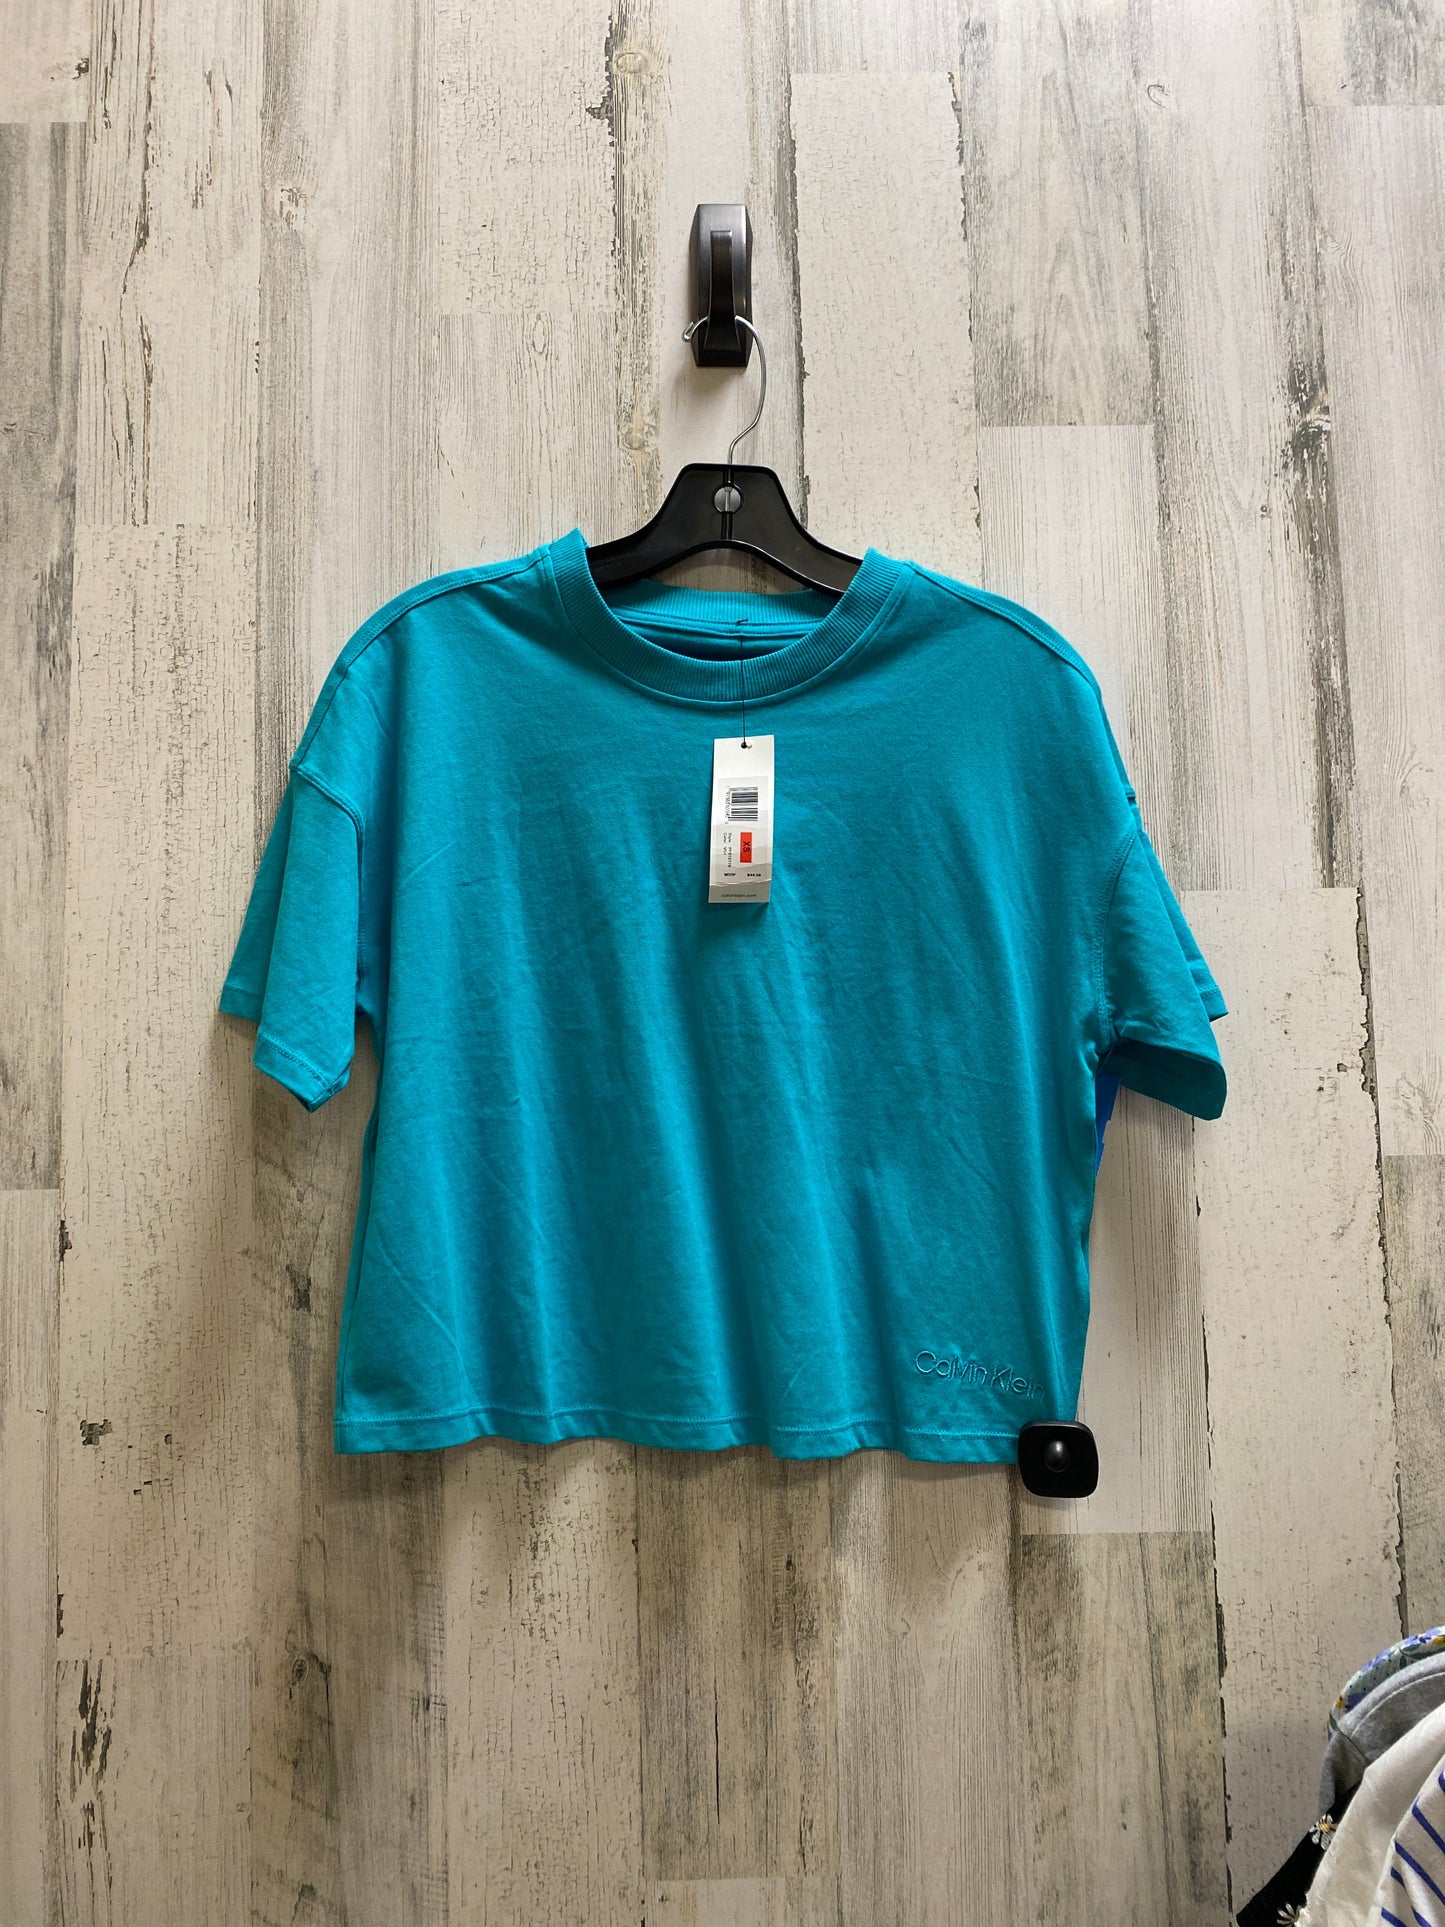 Top Short Sleeve By Calvin Klein  Size: Xs